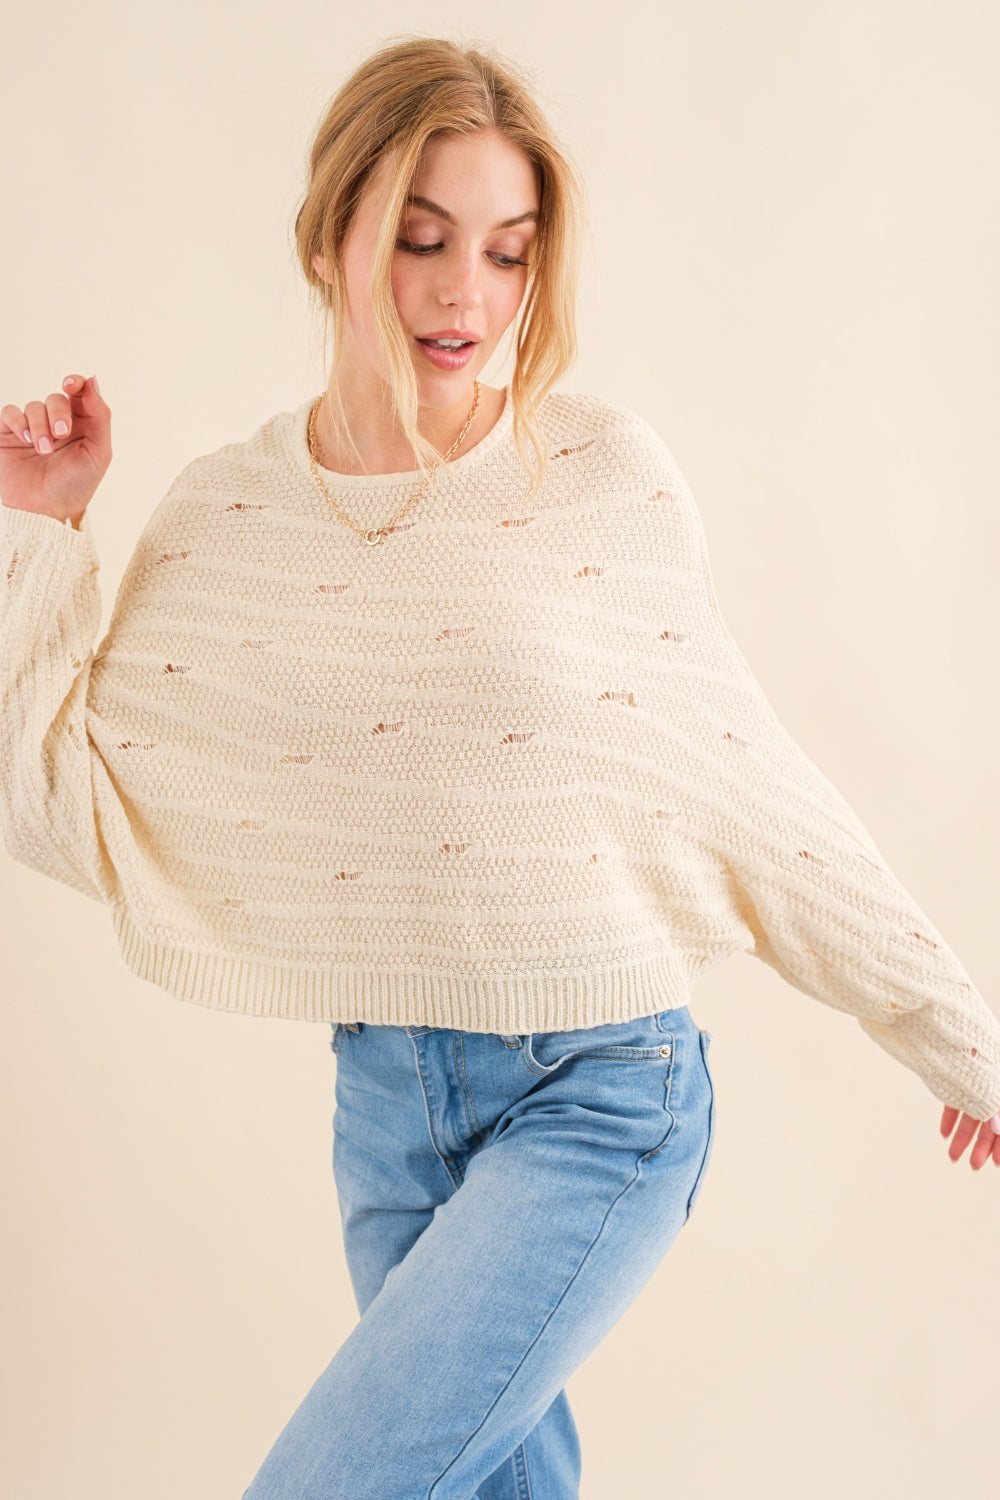 The Dolman Sleeves Sweater